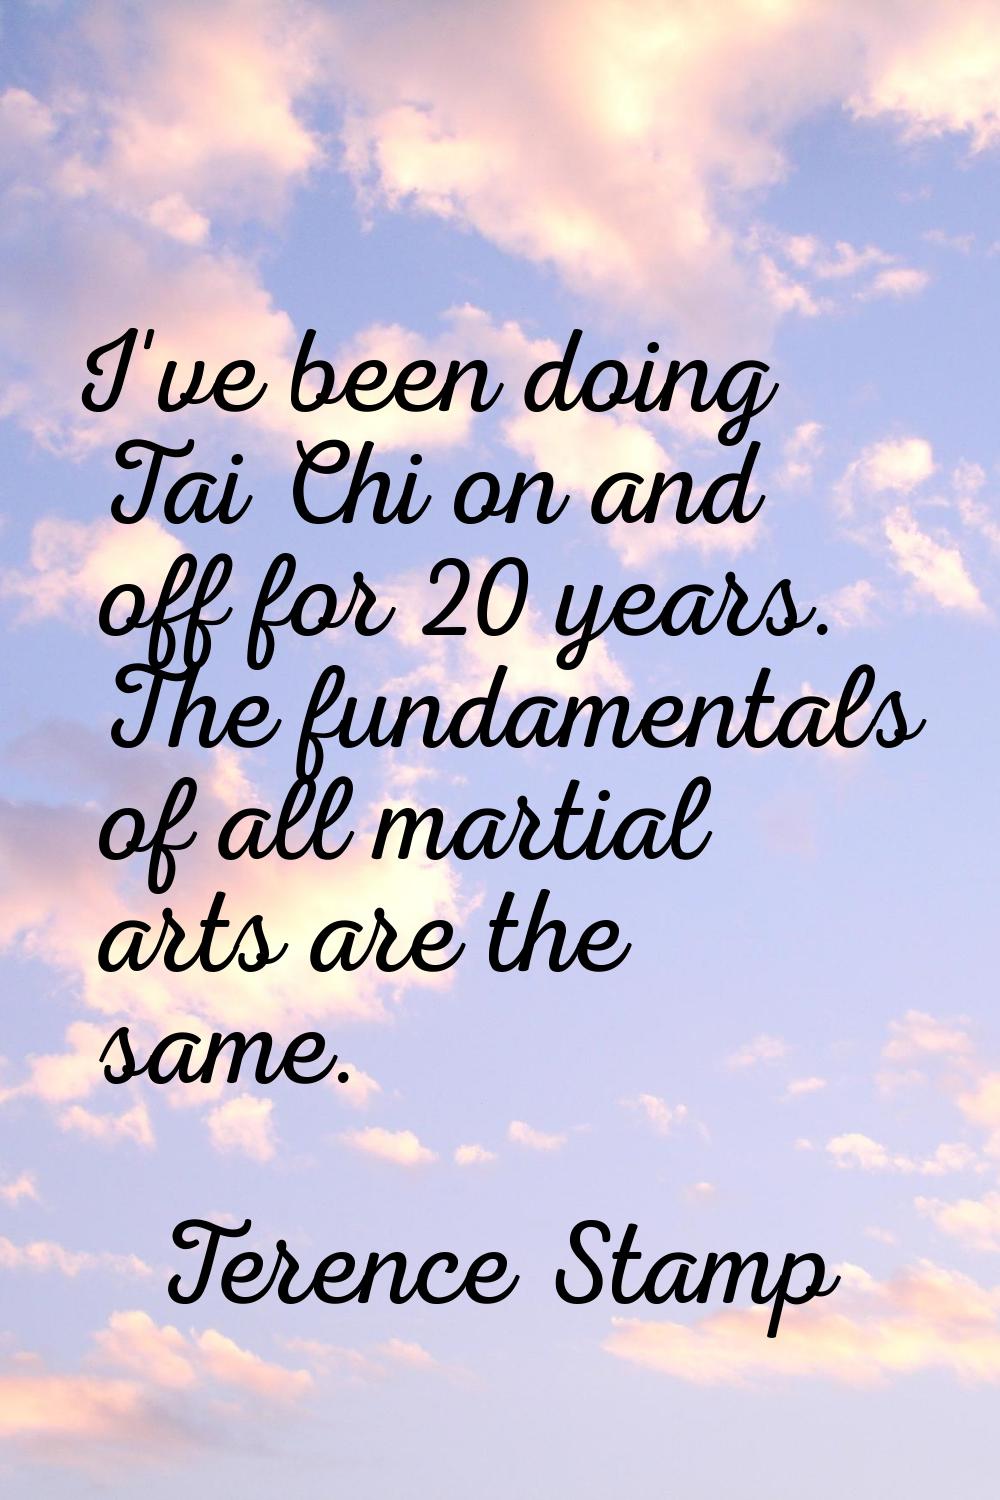 I've been doing Tai Chi on and off for 20 years. The fundamentals of all martial arts are the same.